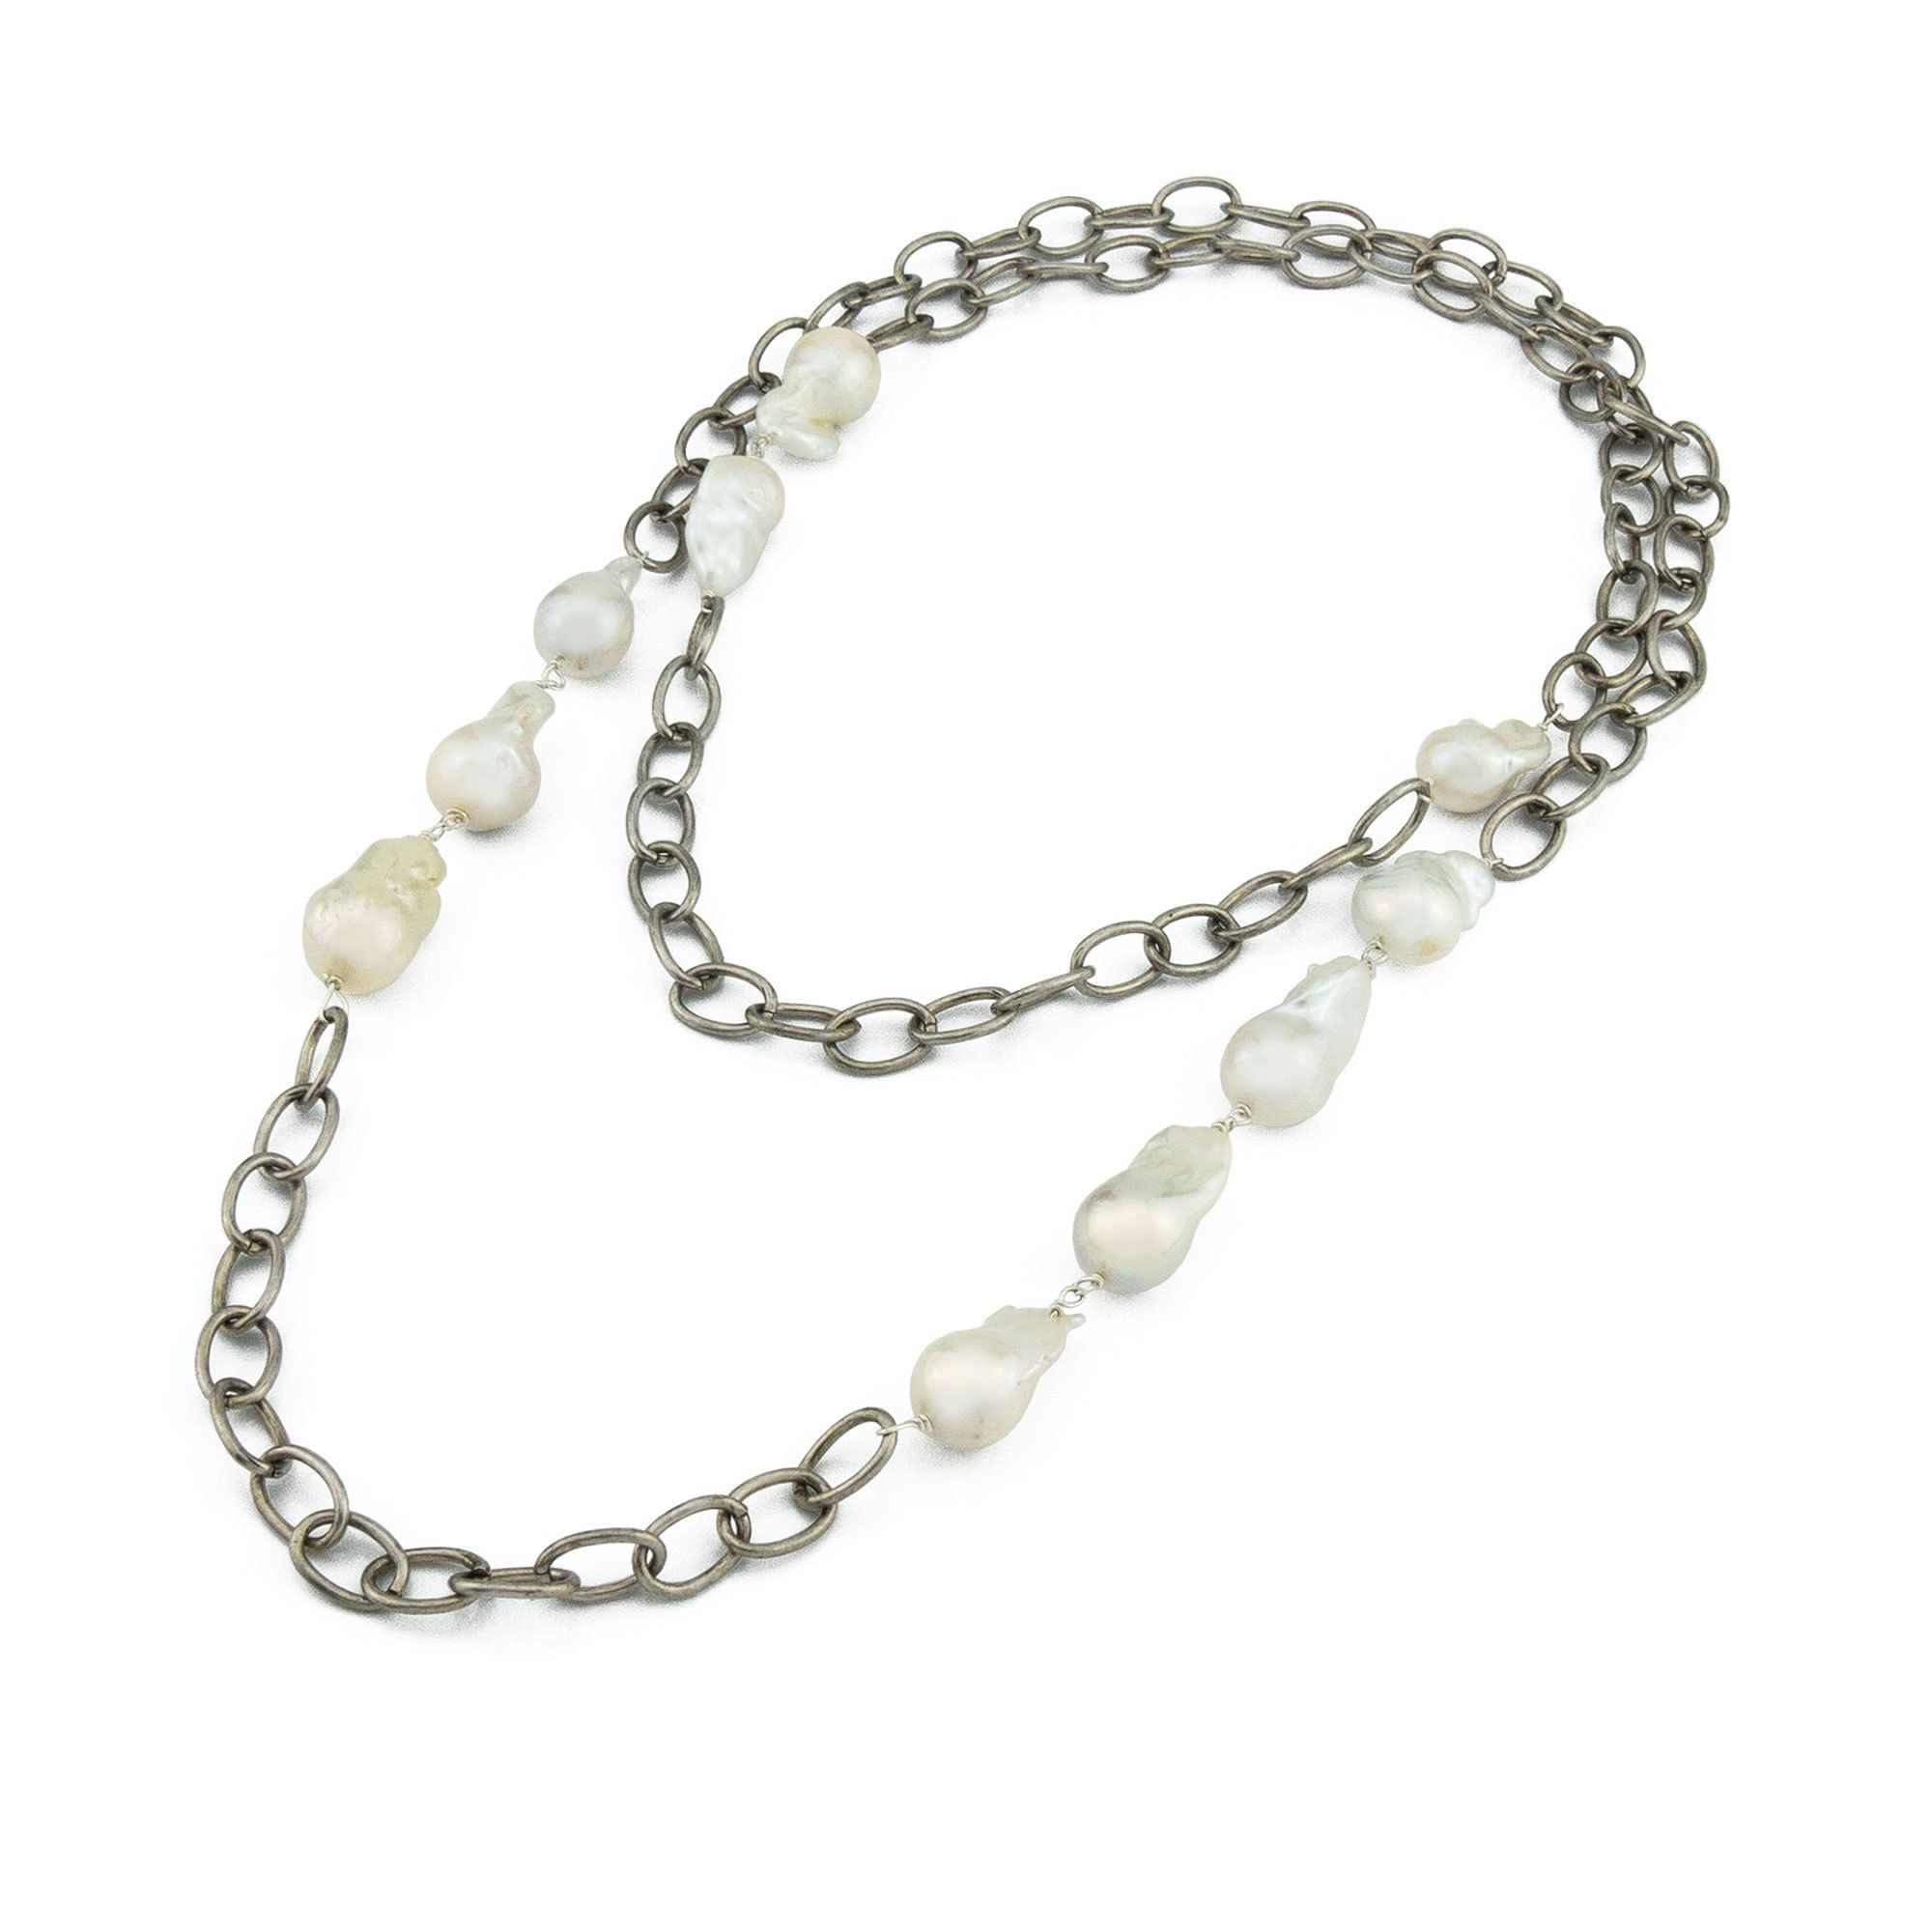 Details about   Baroque White Pearl 10x9mm 2-Tone 925 Sterling Silver Necklace 17 Inches